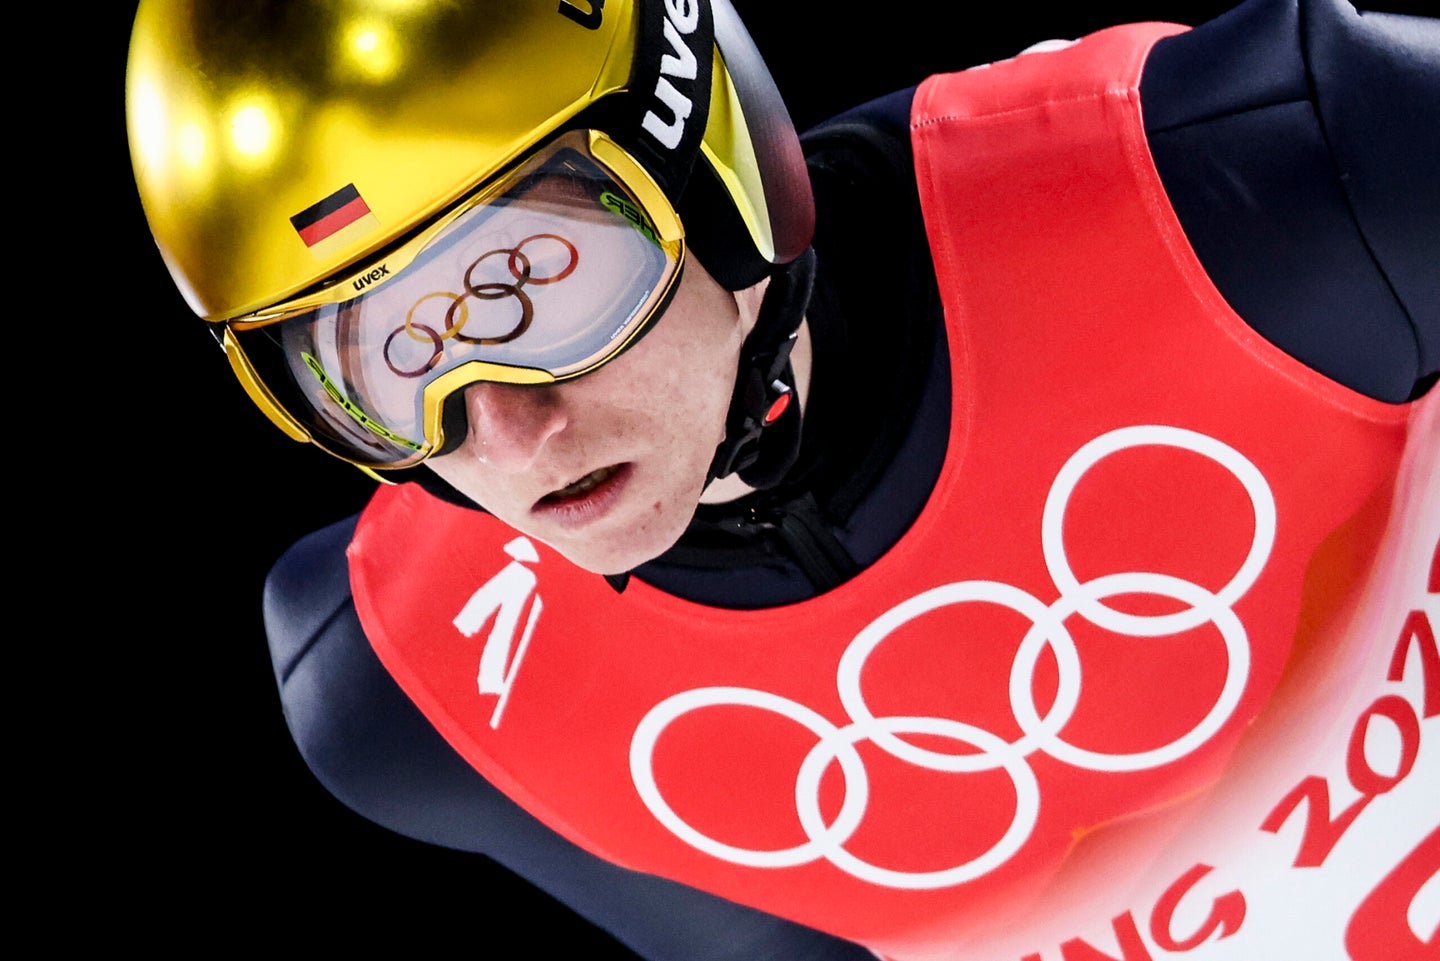 Olympic rings are reflected in Karl Geiger goggles during nordic ski jumping large hill, mens qualification event at the Beijing 2022 Winter Olympic Games.